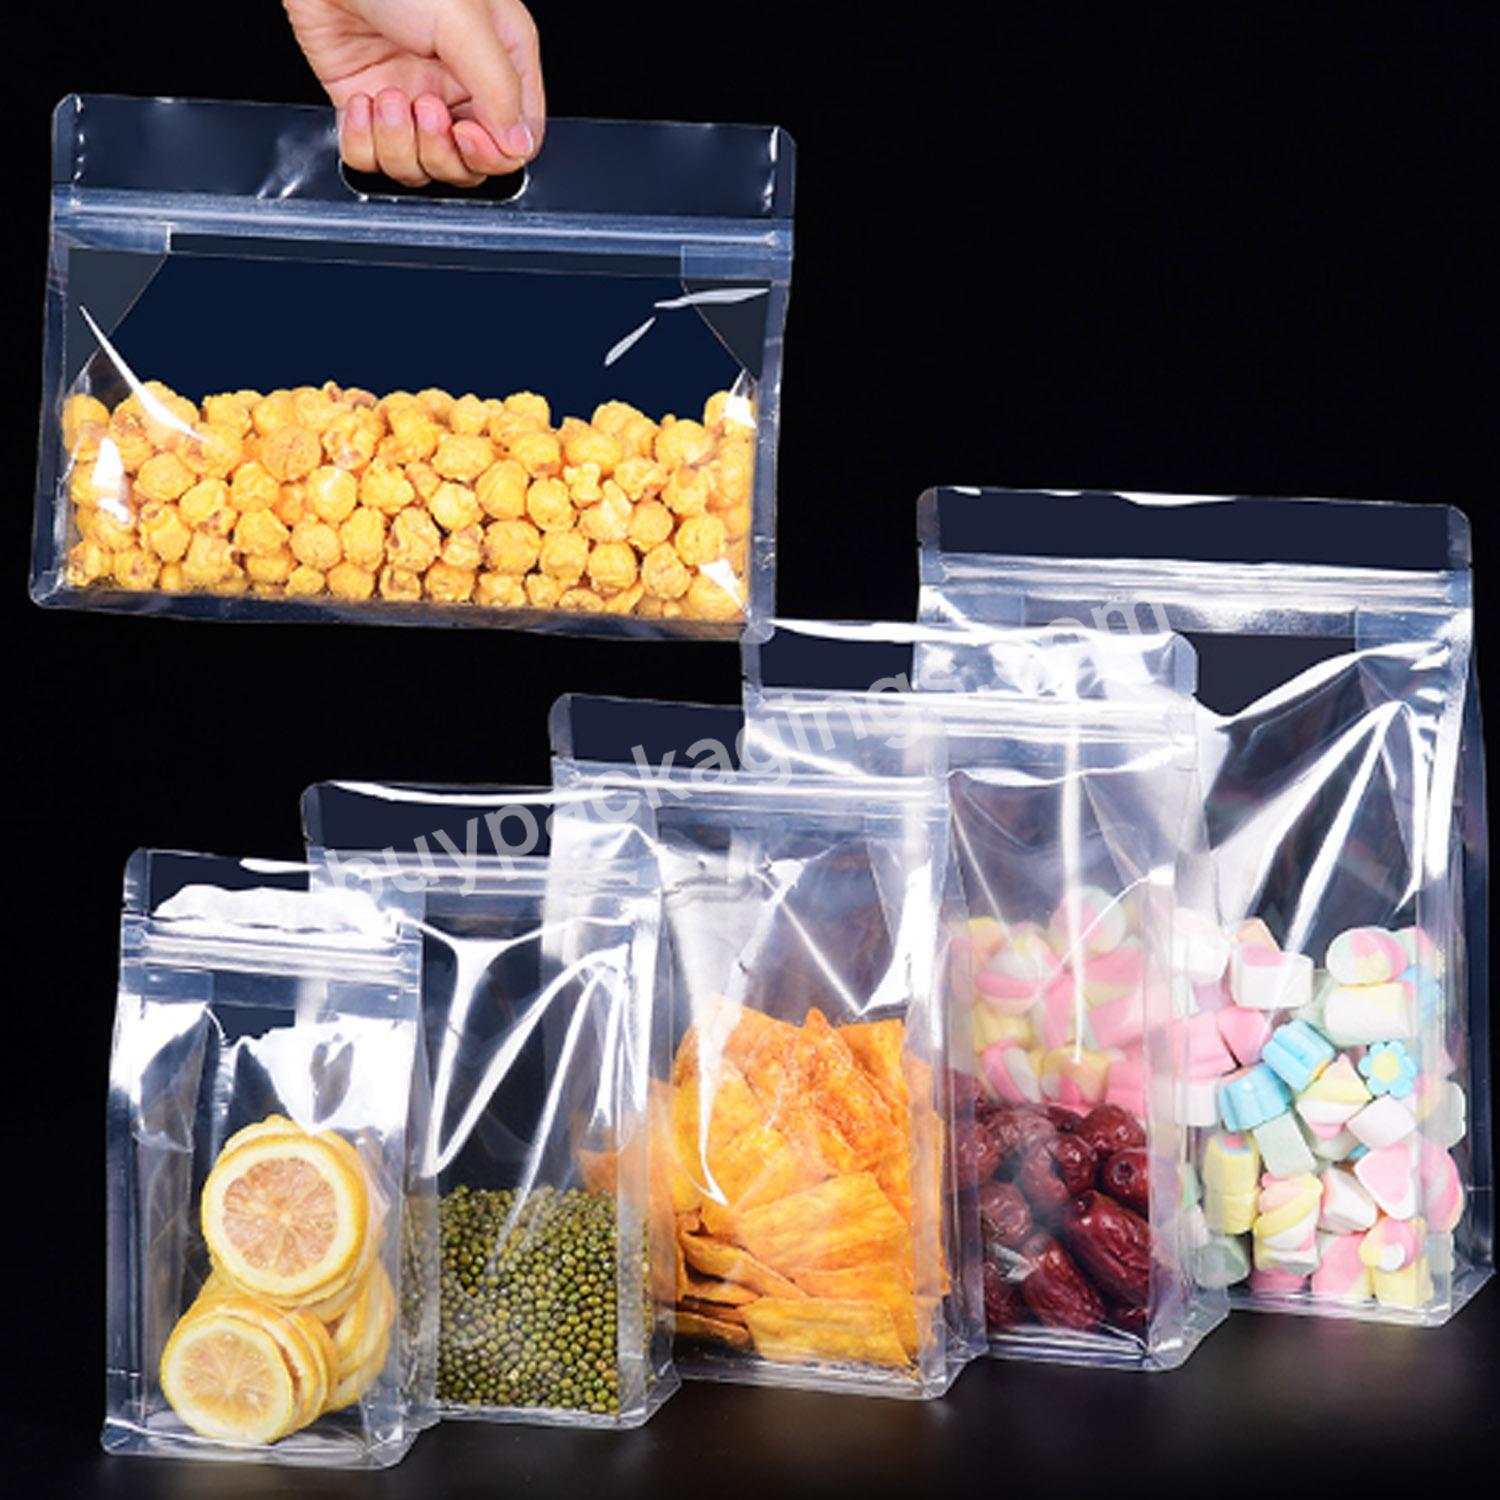 Wholesale Transparent Plastic Smell Proof Flat Bottom Packaging Bag Dried Food Snack Ziplock Pouch - Buy Plastic Smell Proof Flat Bottom Packaging Bag,Dried Food Ziplock Pouch,Wholesale Transparent Pouch.